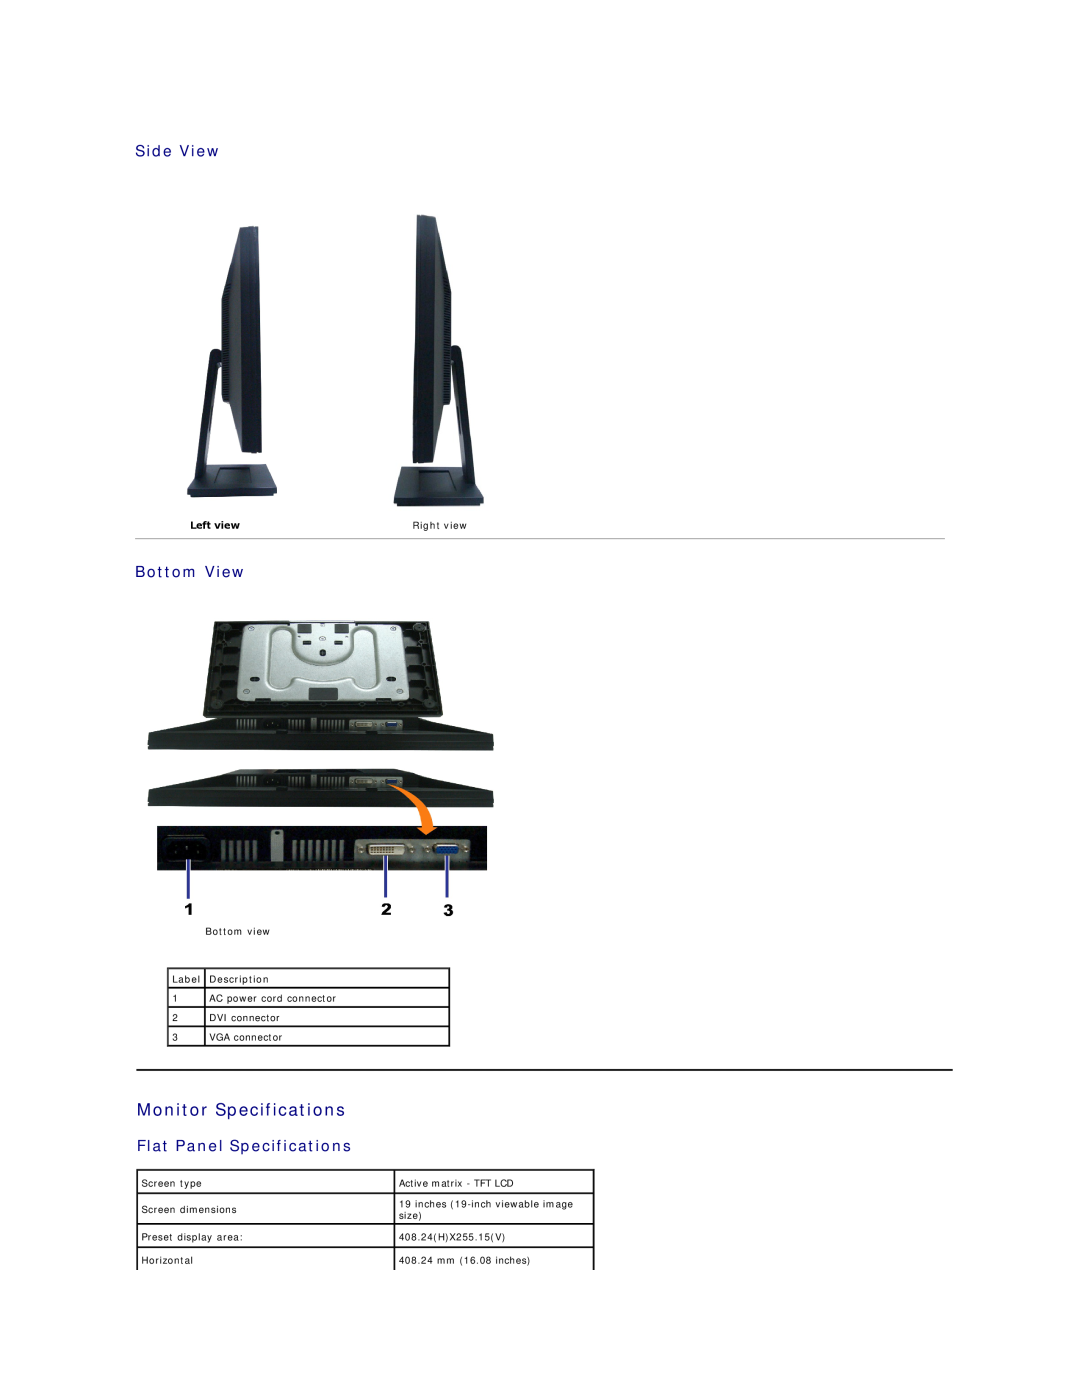 Dell E1909W Monitor Specifications, Side View, Bottom View, Flat Panel Specifications, Left view, Right view, Bottom view 